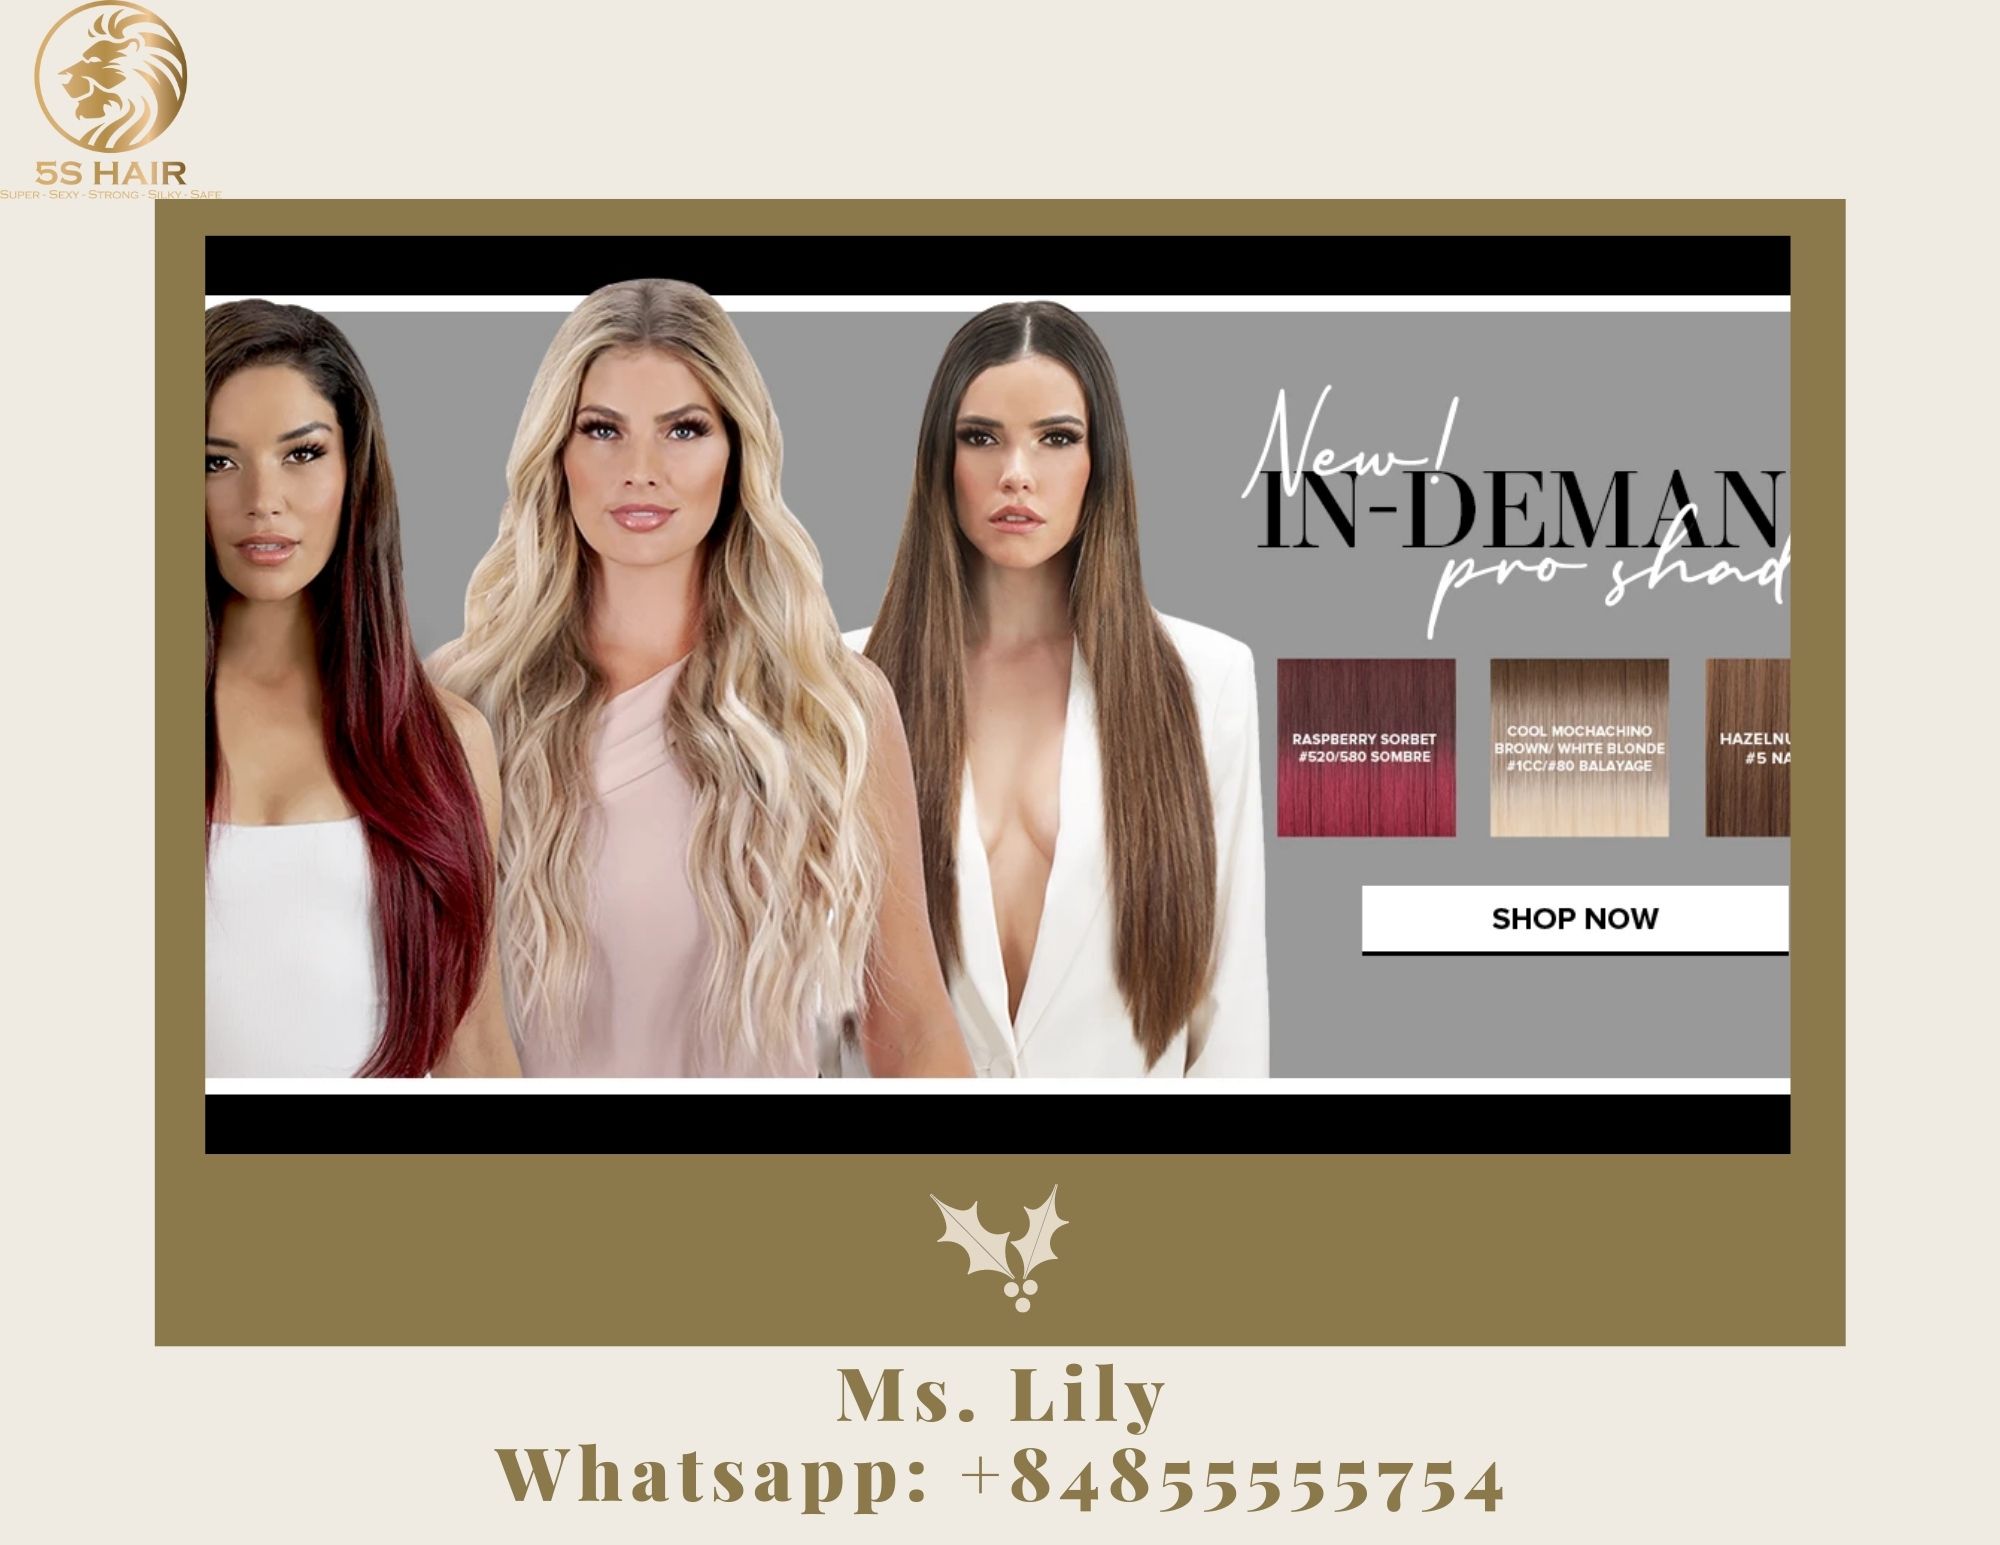 Hair extensions review: Are Bellami hair extensions good as people say